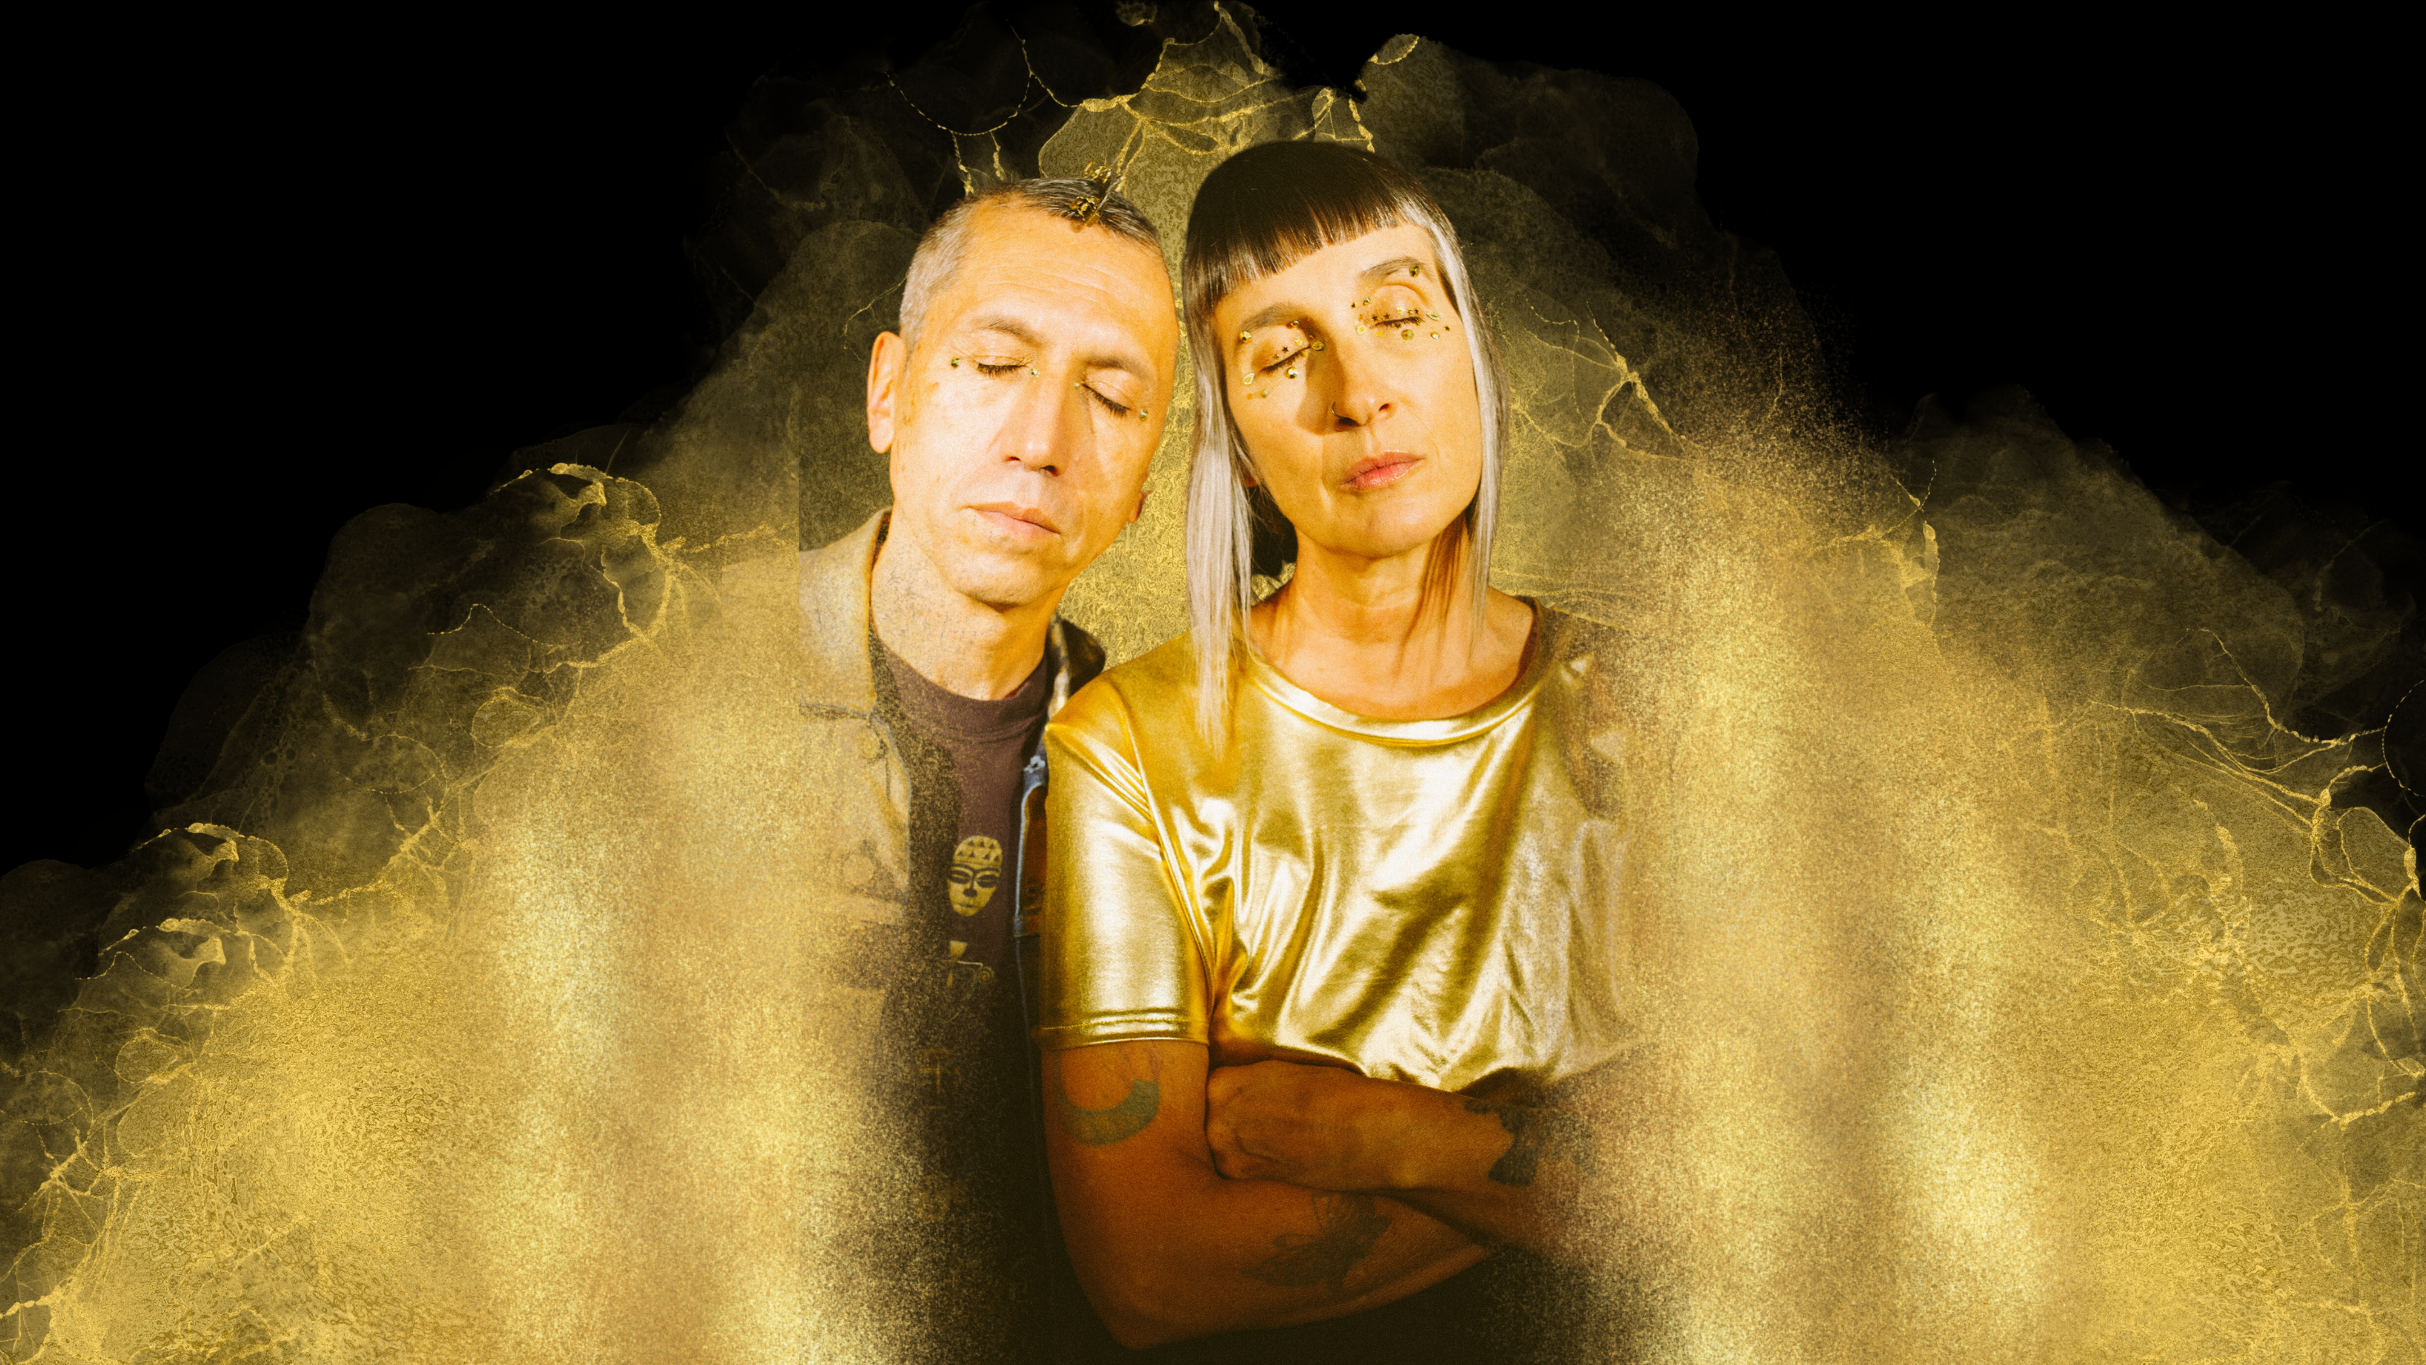 Aterciopelados at The Observatory